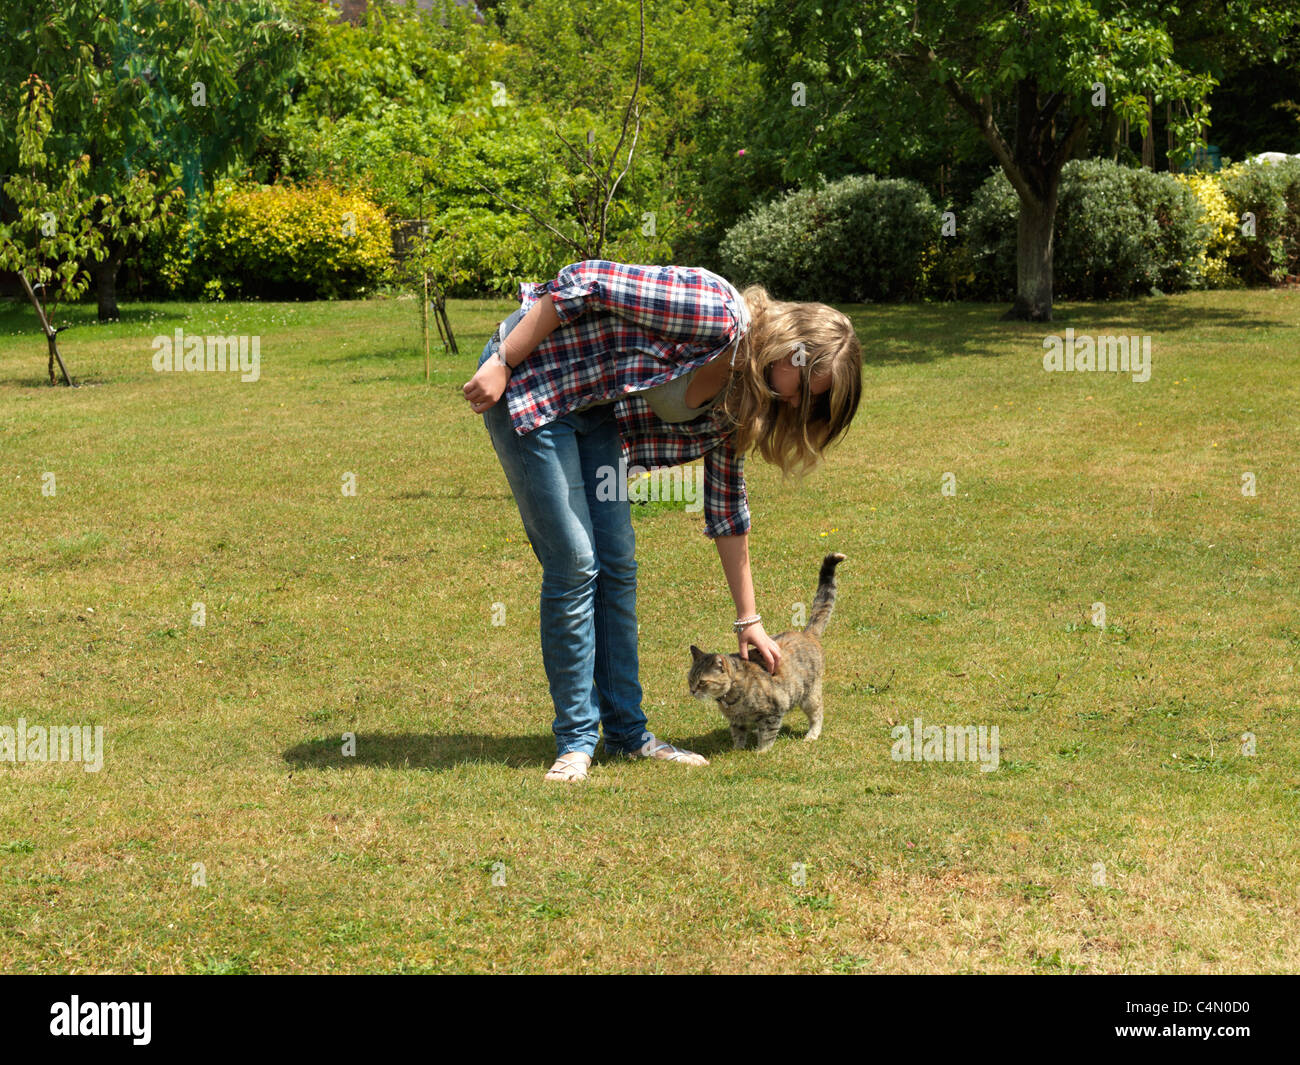 Young Woman Out In The Garden Wearing Shirt, Jeans And Sandals Stroking A Tabby Cat Stock Photo